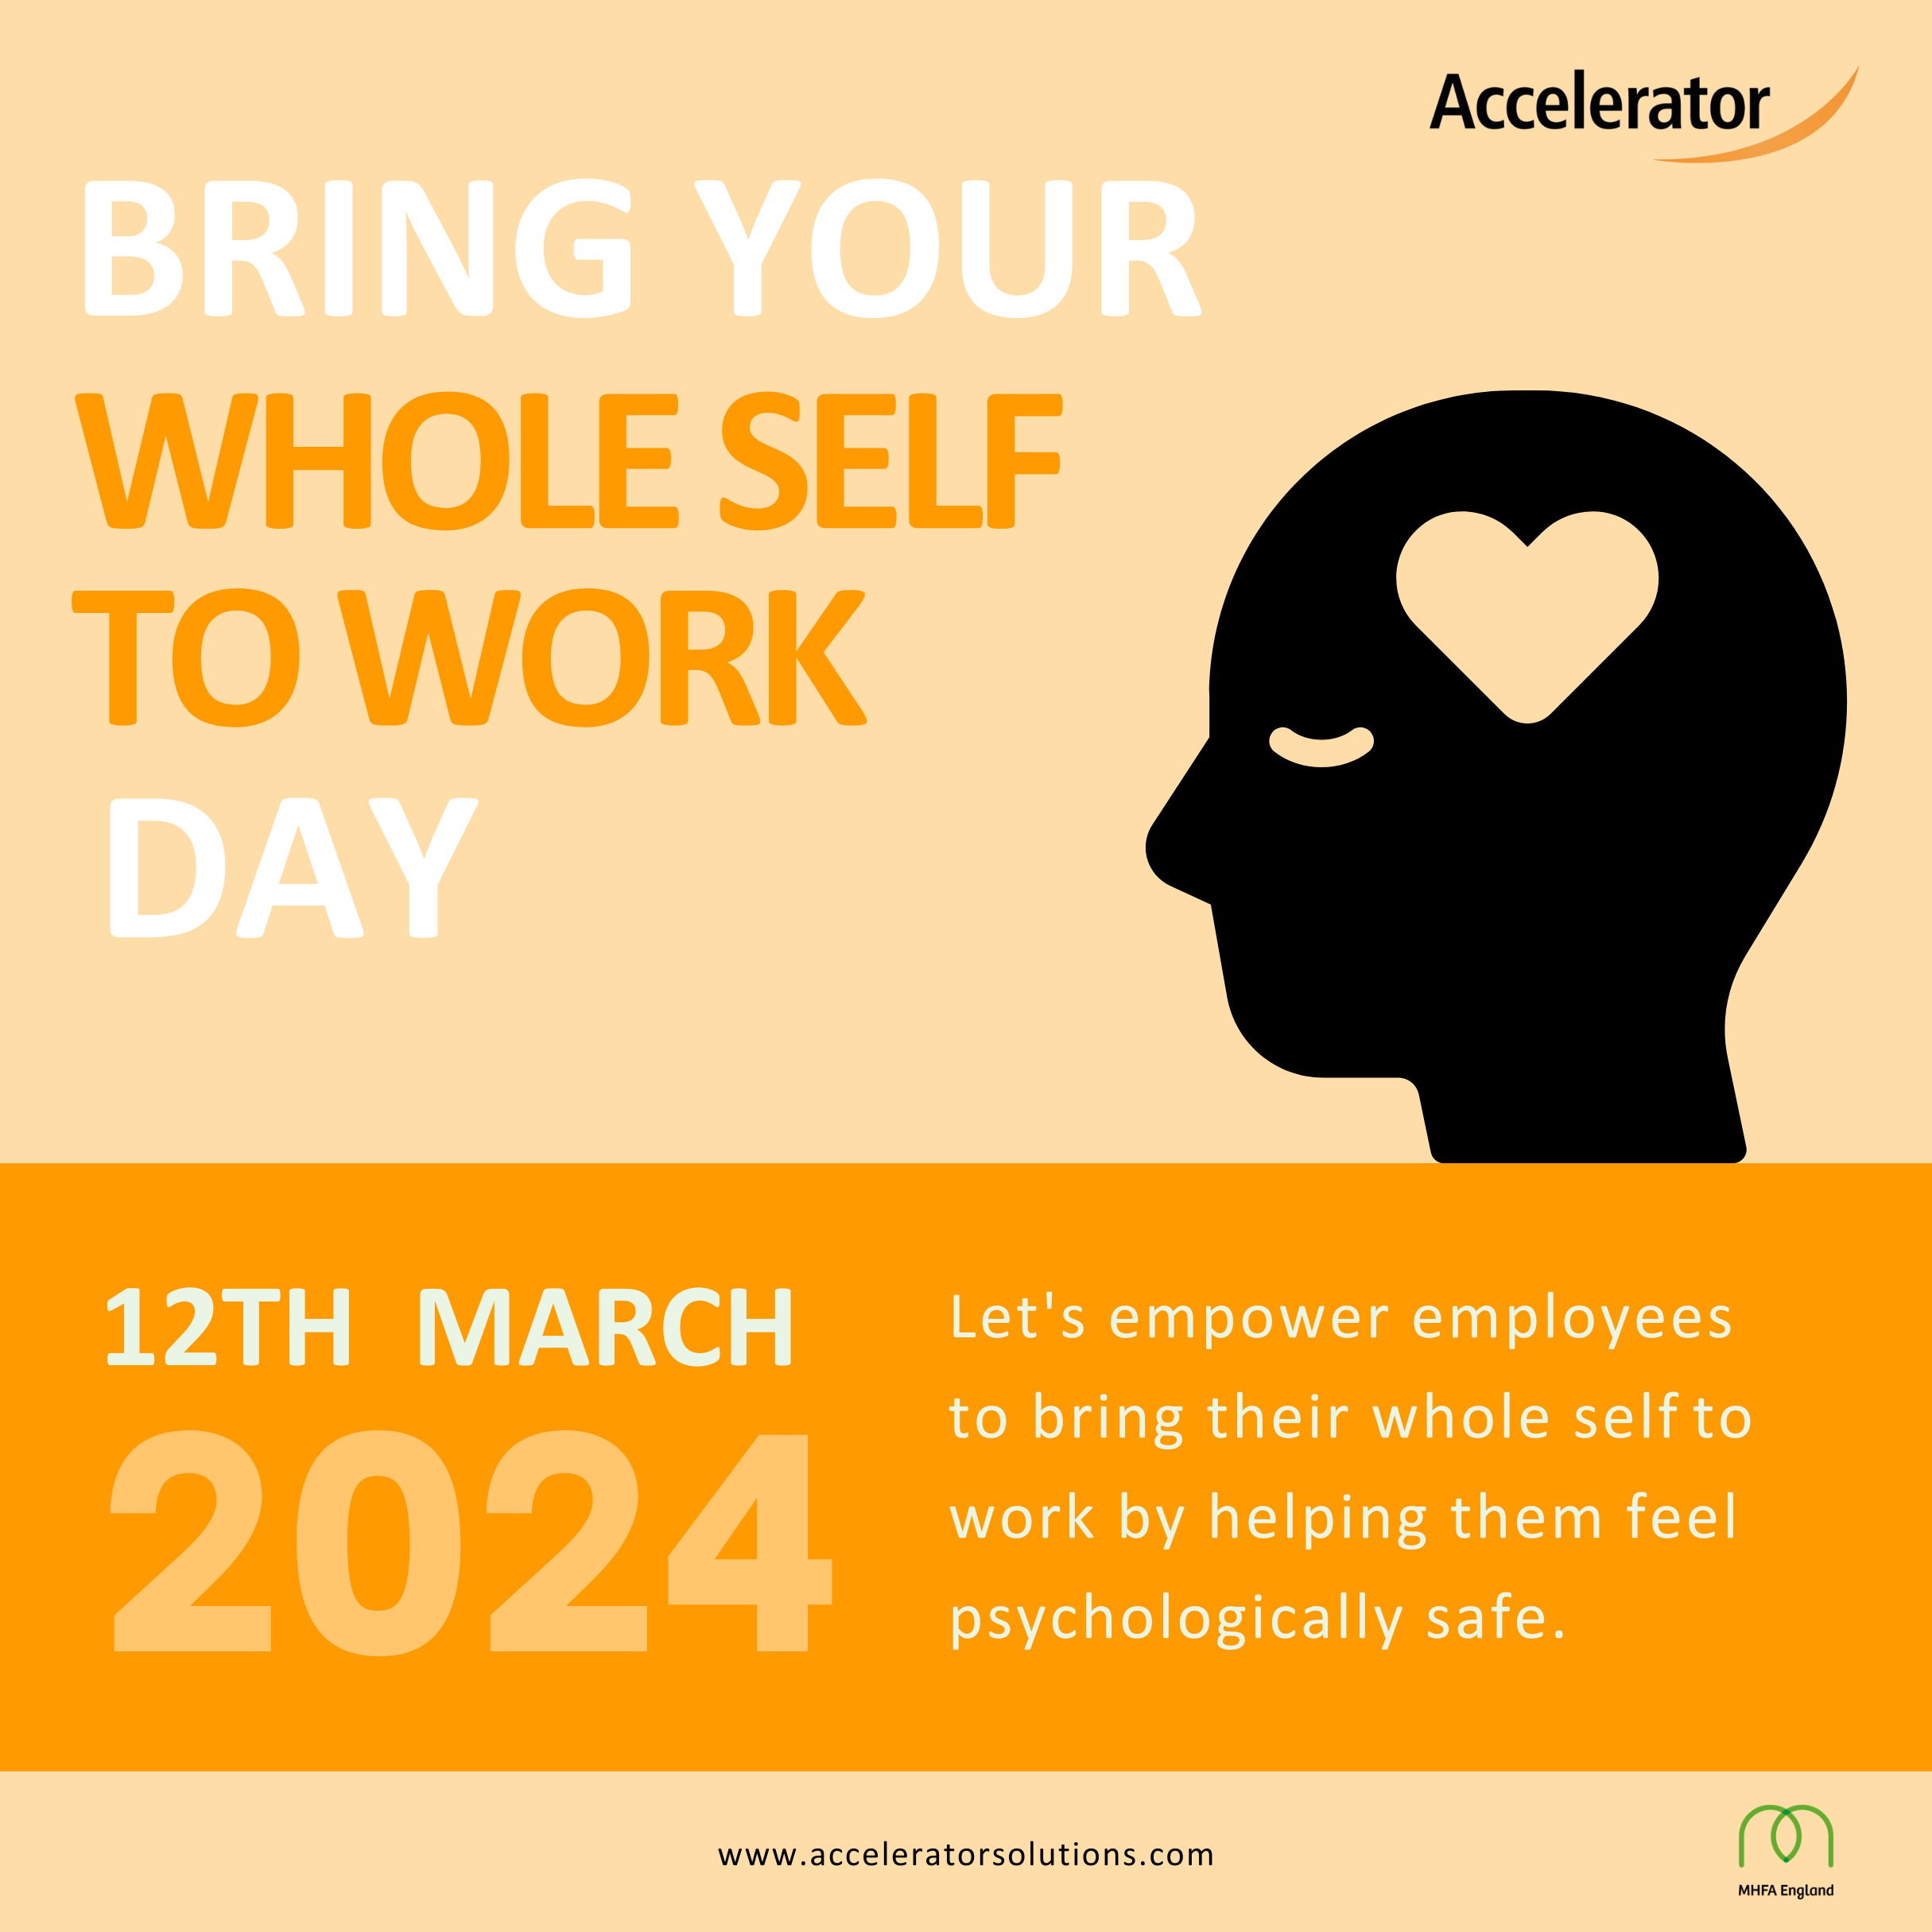 We're supporting the Mental Health First Aid England campaign – Happy "Bring Your Whole Self to Work Day"!